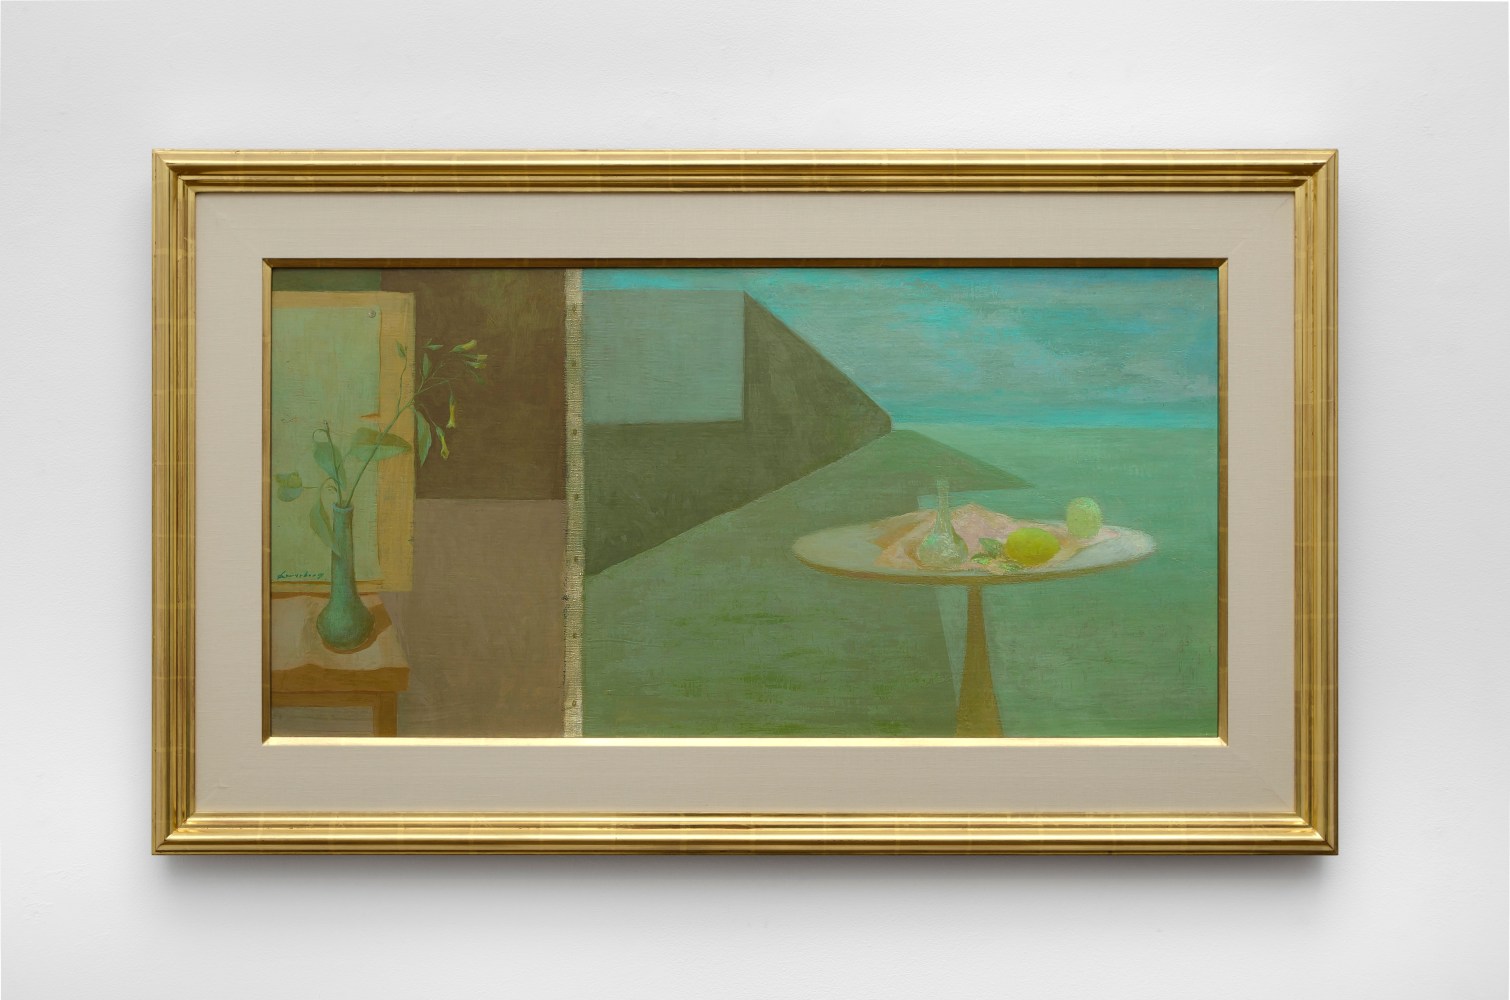 Helen Lundeberg (1908-1999)
Enigma of Reality, 1955&amp;nbsp;&amp;nbsp;&amp;nbsp;&amp;nbsp;
oil on canvas
20 x 40 inches;&amp;nbsp;&amp;nbsp;50.8 x 101.6 centimeters
LSFA# 01524